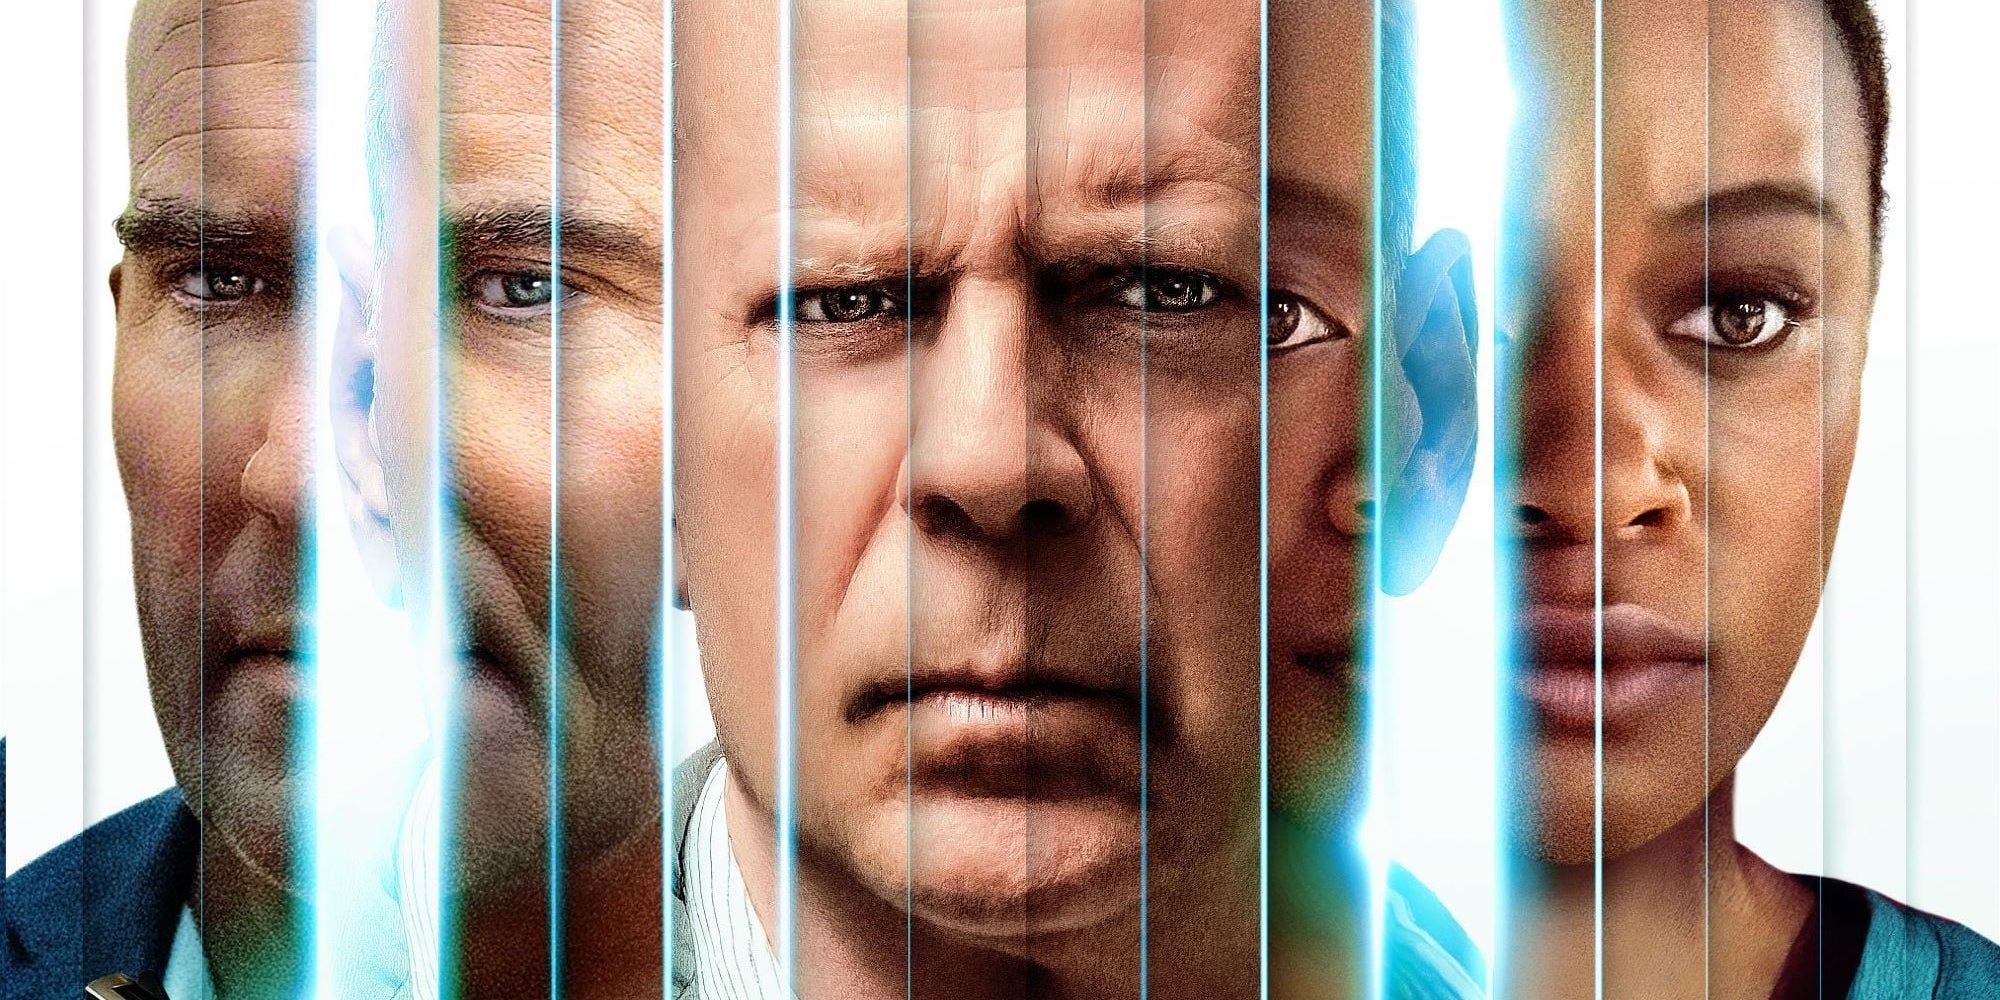 Last Announced Bruce Willis Movie Gets 2023 Release Date